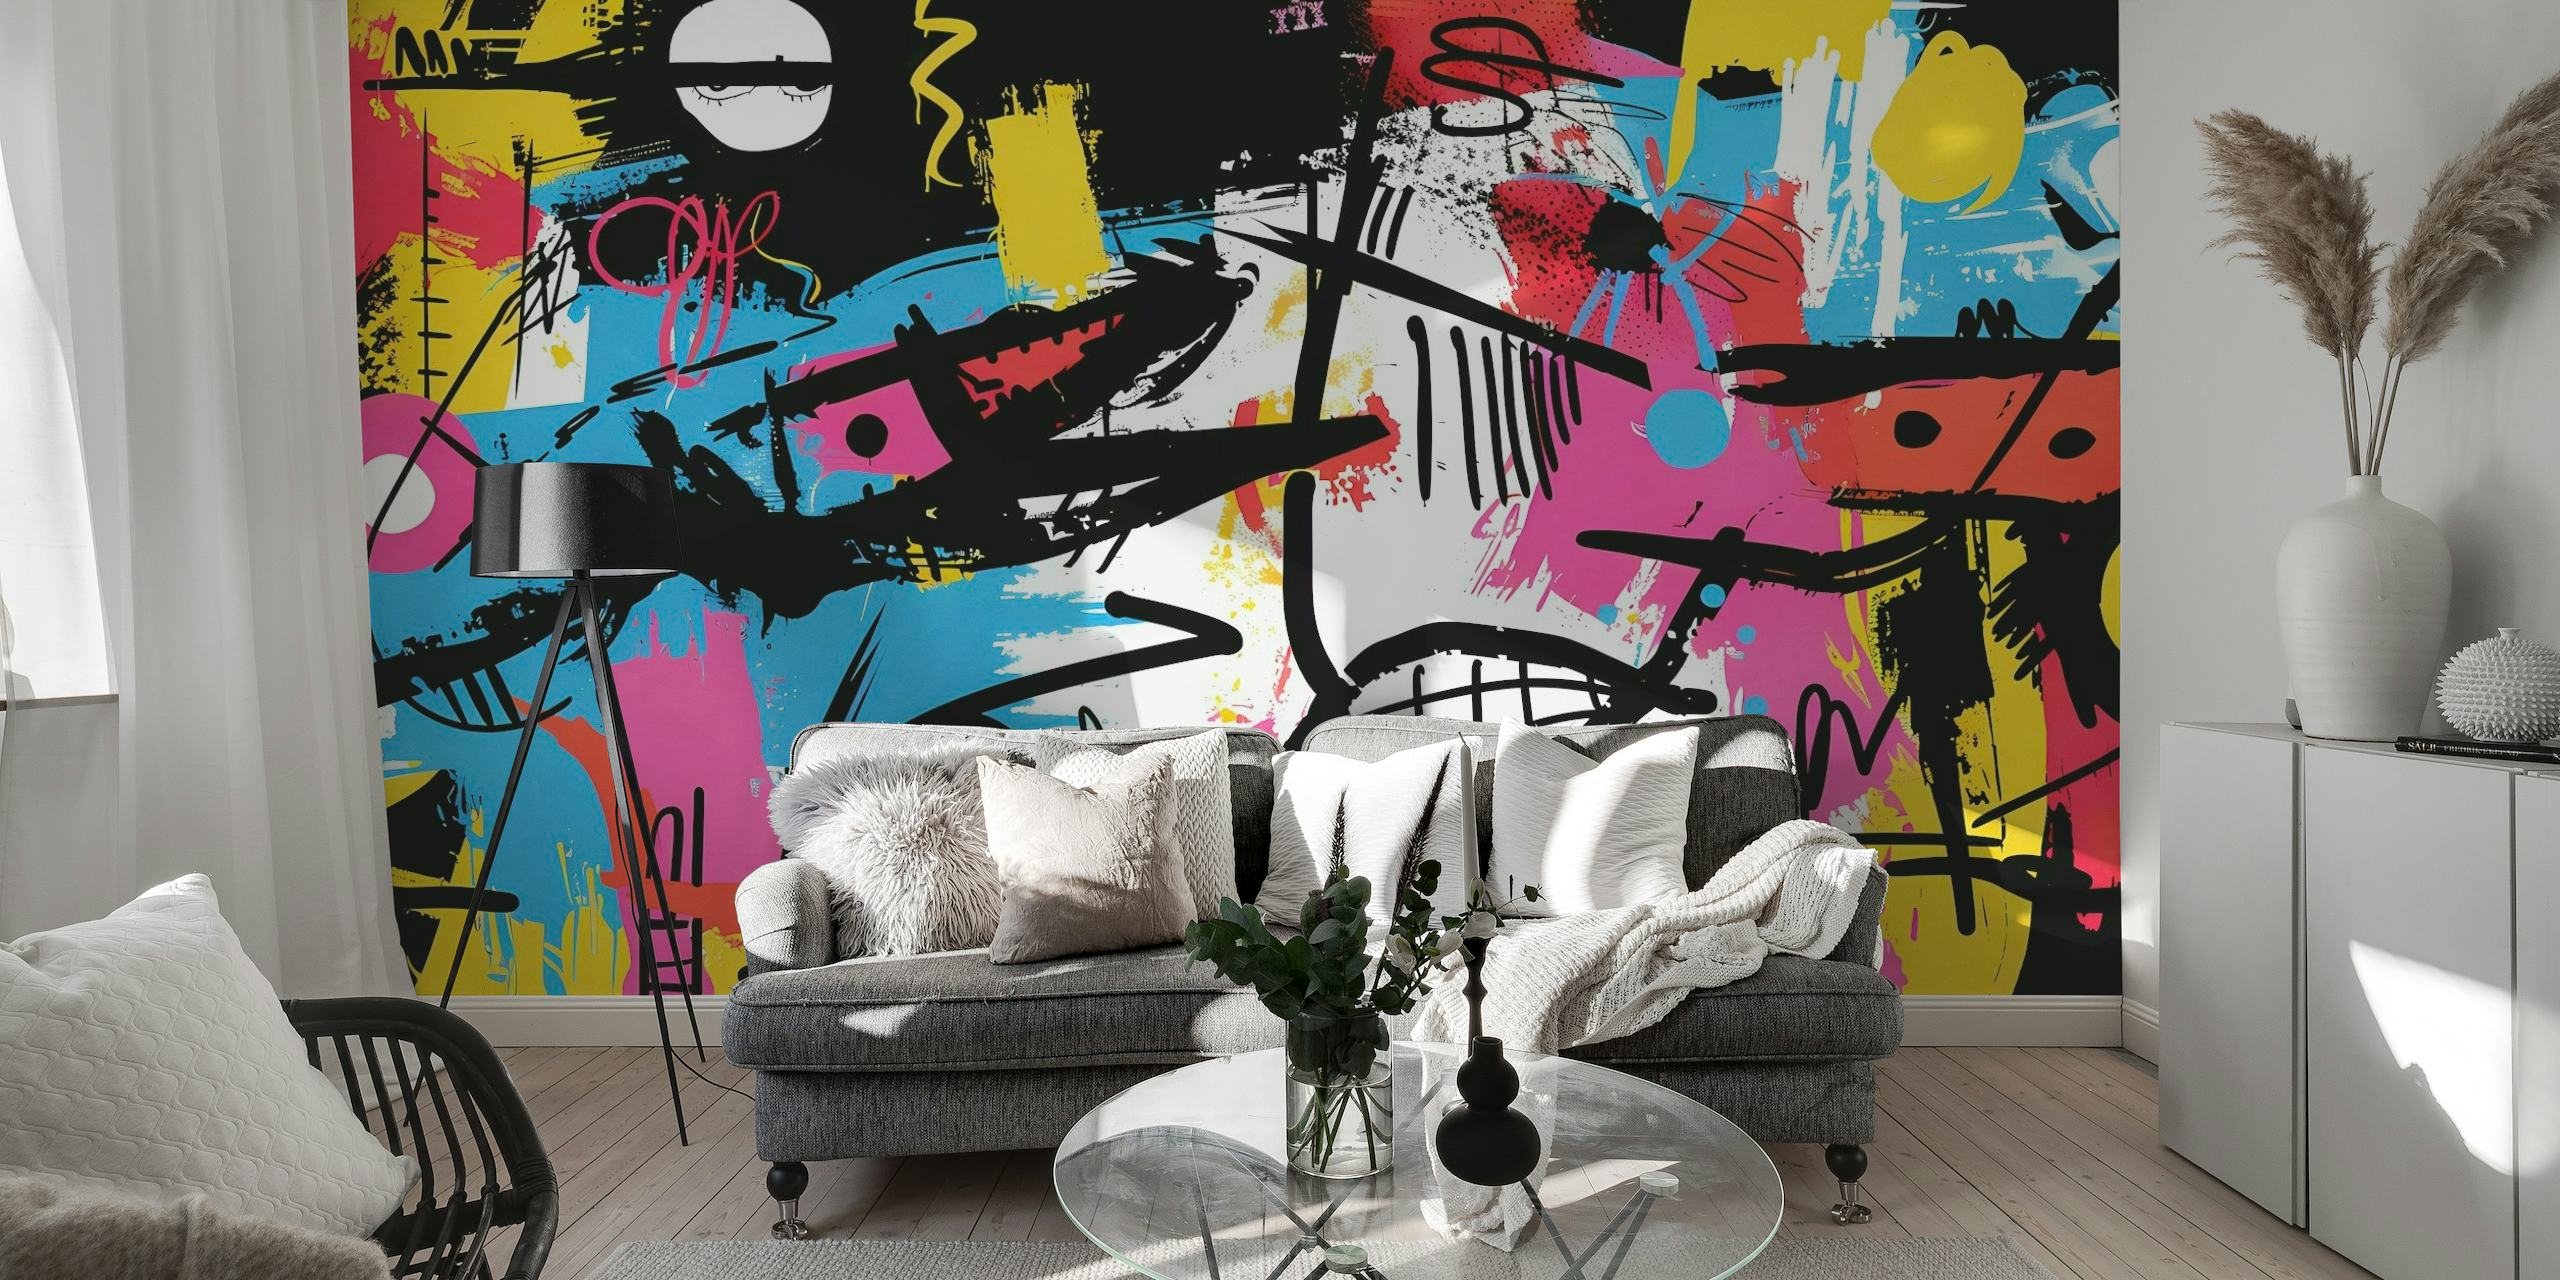 Vibrant street art style wall mural with a mix of colors and graffiti elements